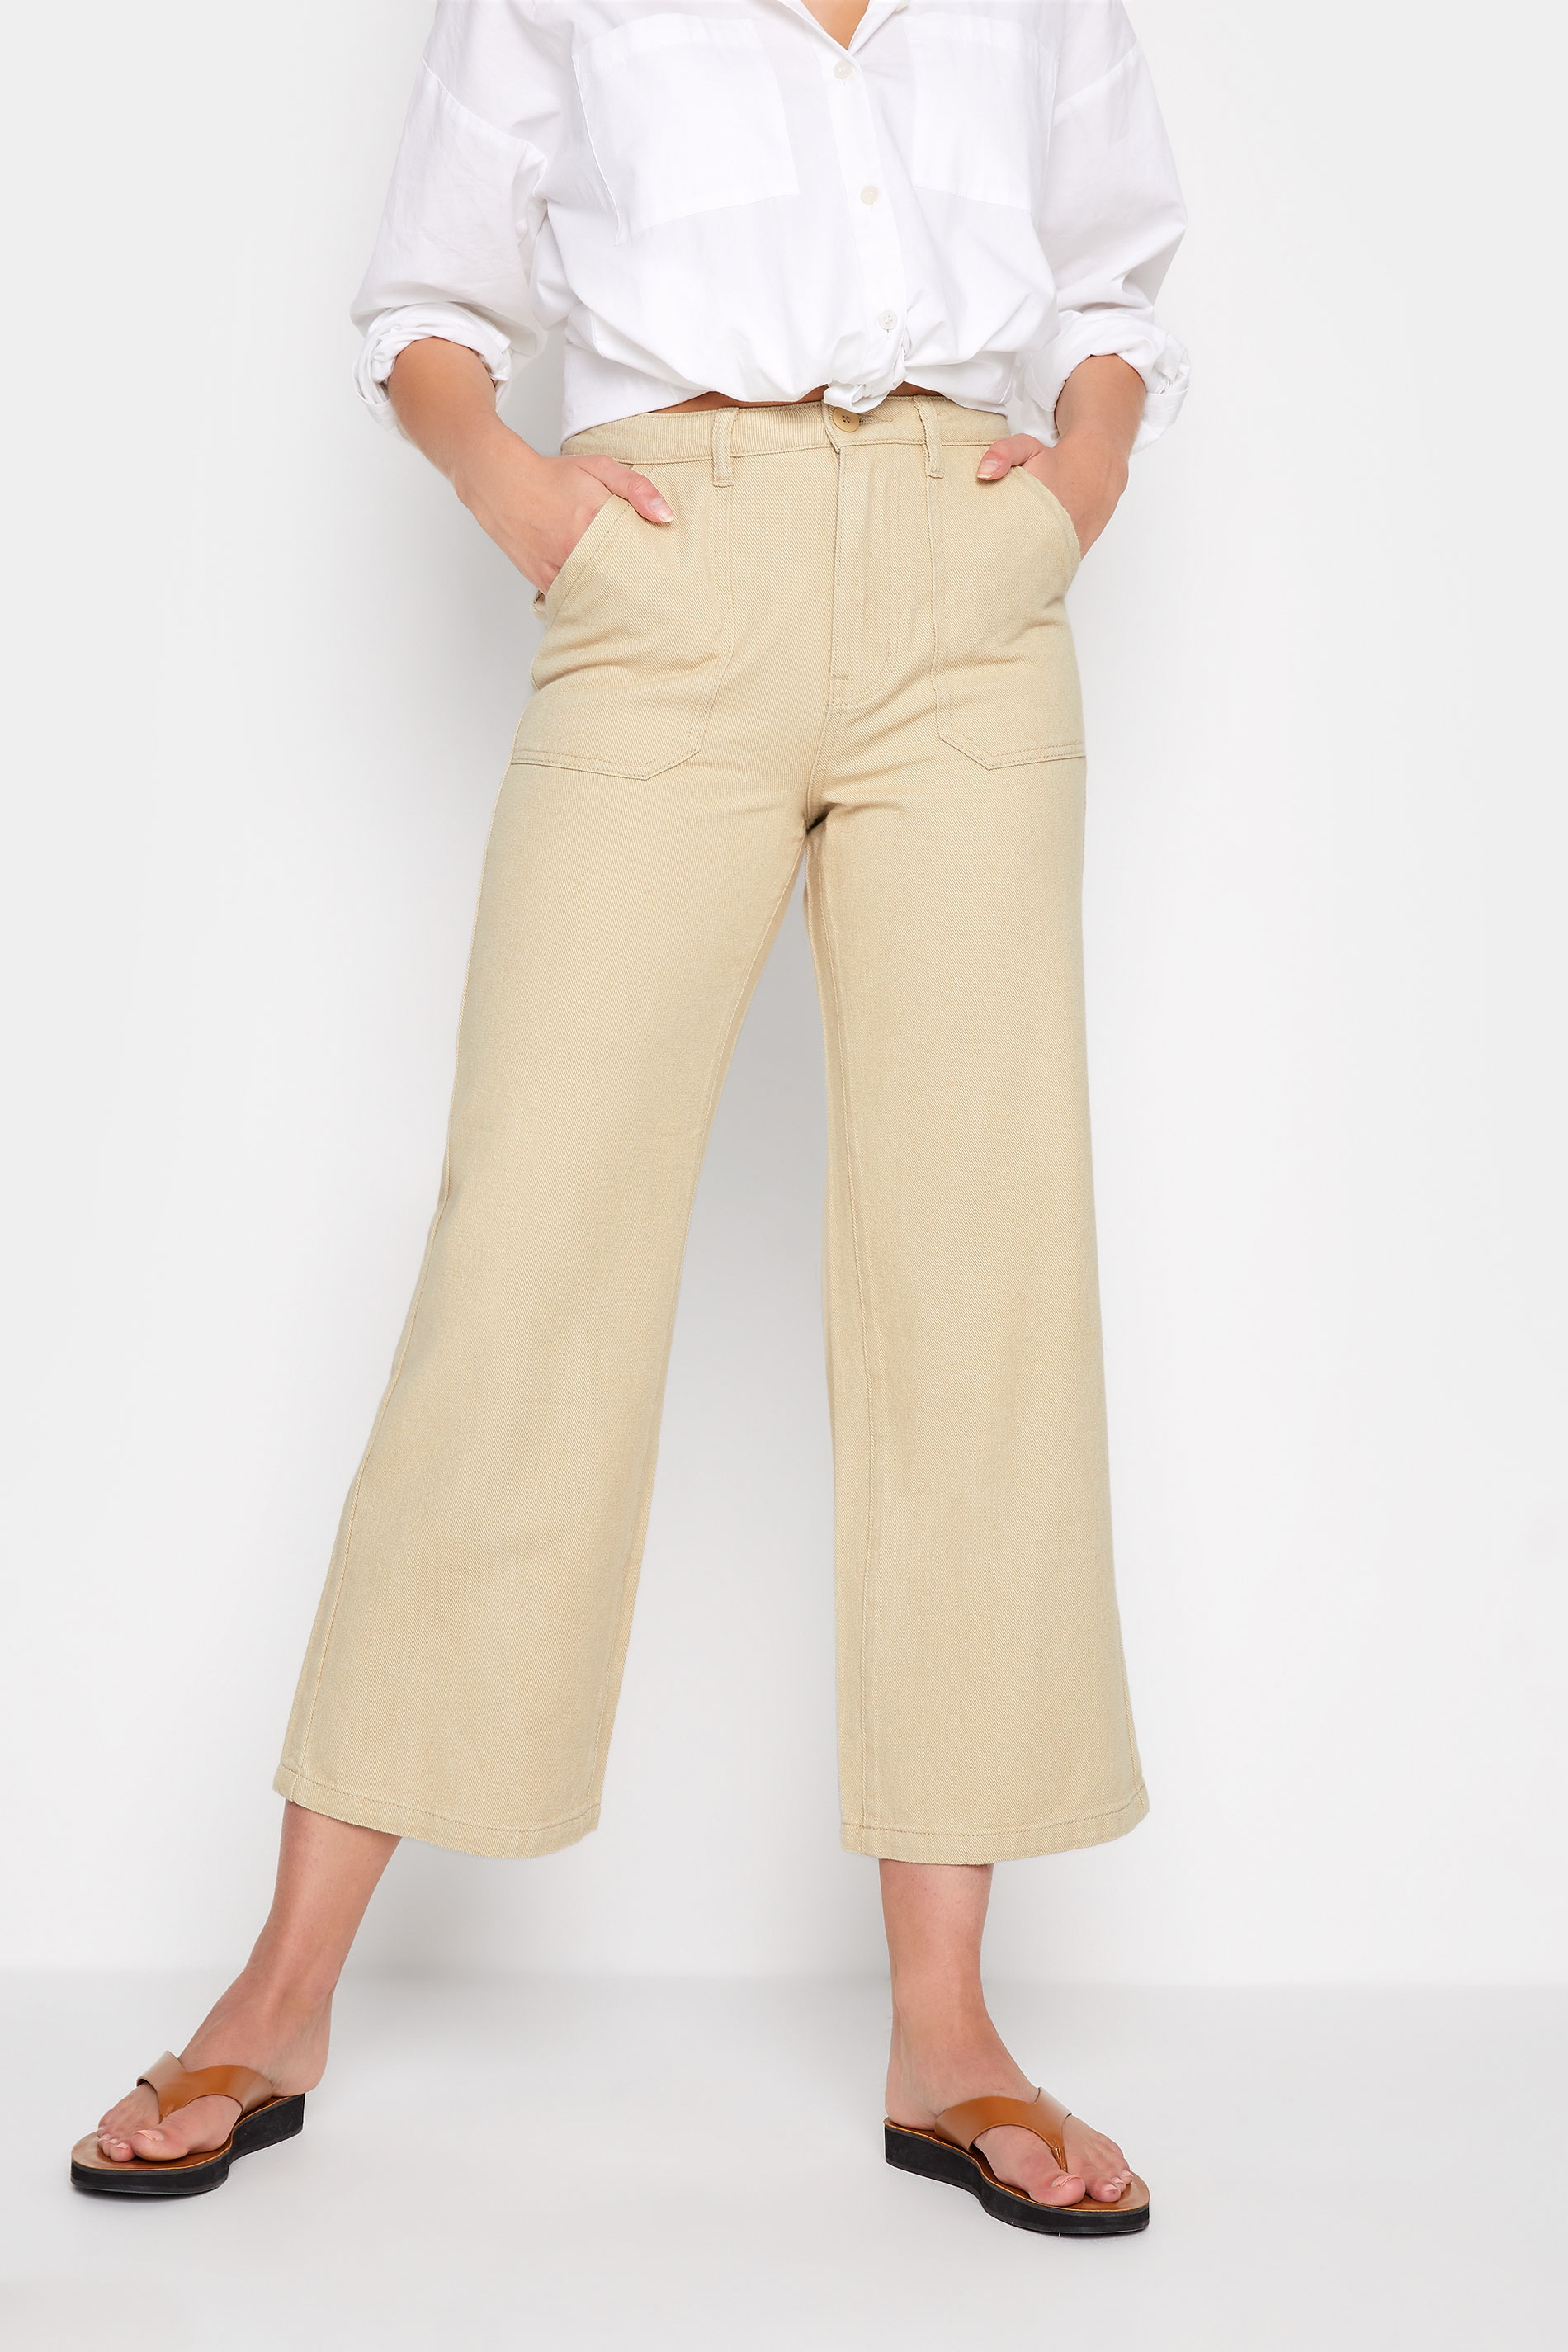 LTS Tall Cream Cotton Twill Wide Leg Cropped Trousers_A.jpg